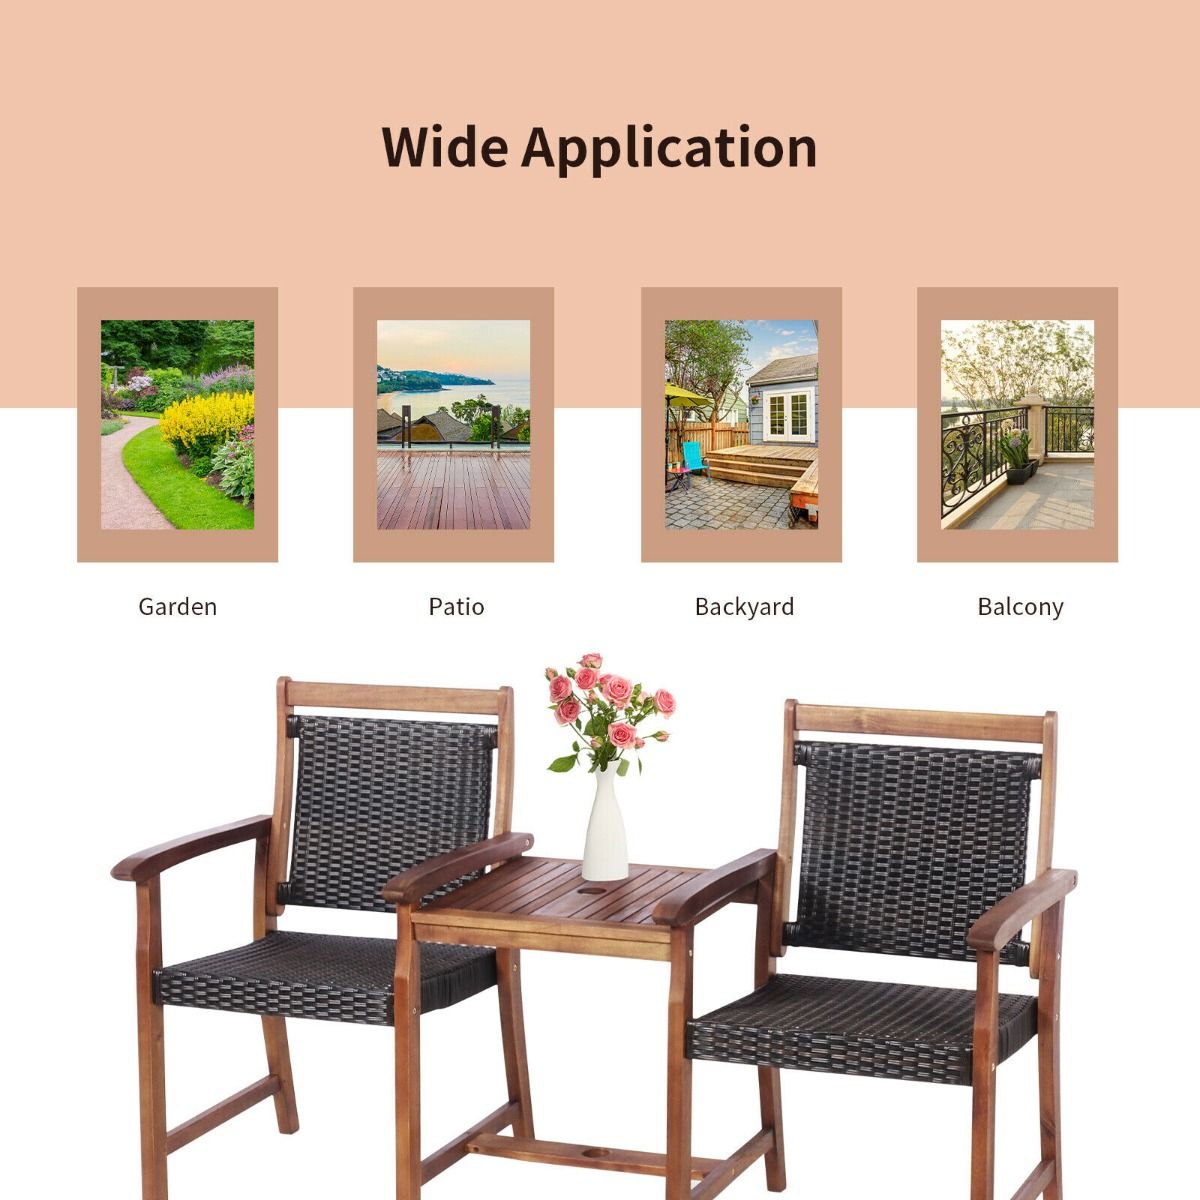 3 Pieces Wooden Furniture Set with Umbrella Hole for Outdoor